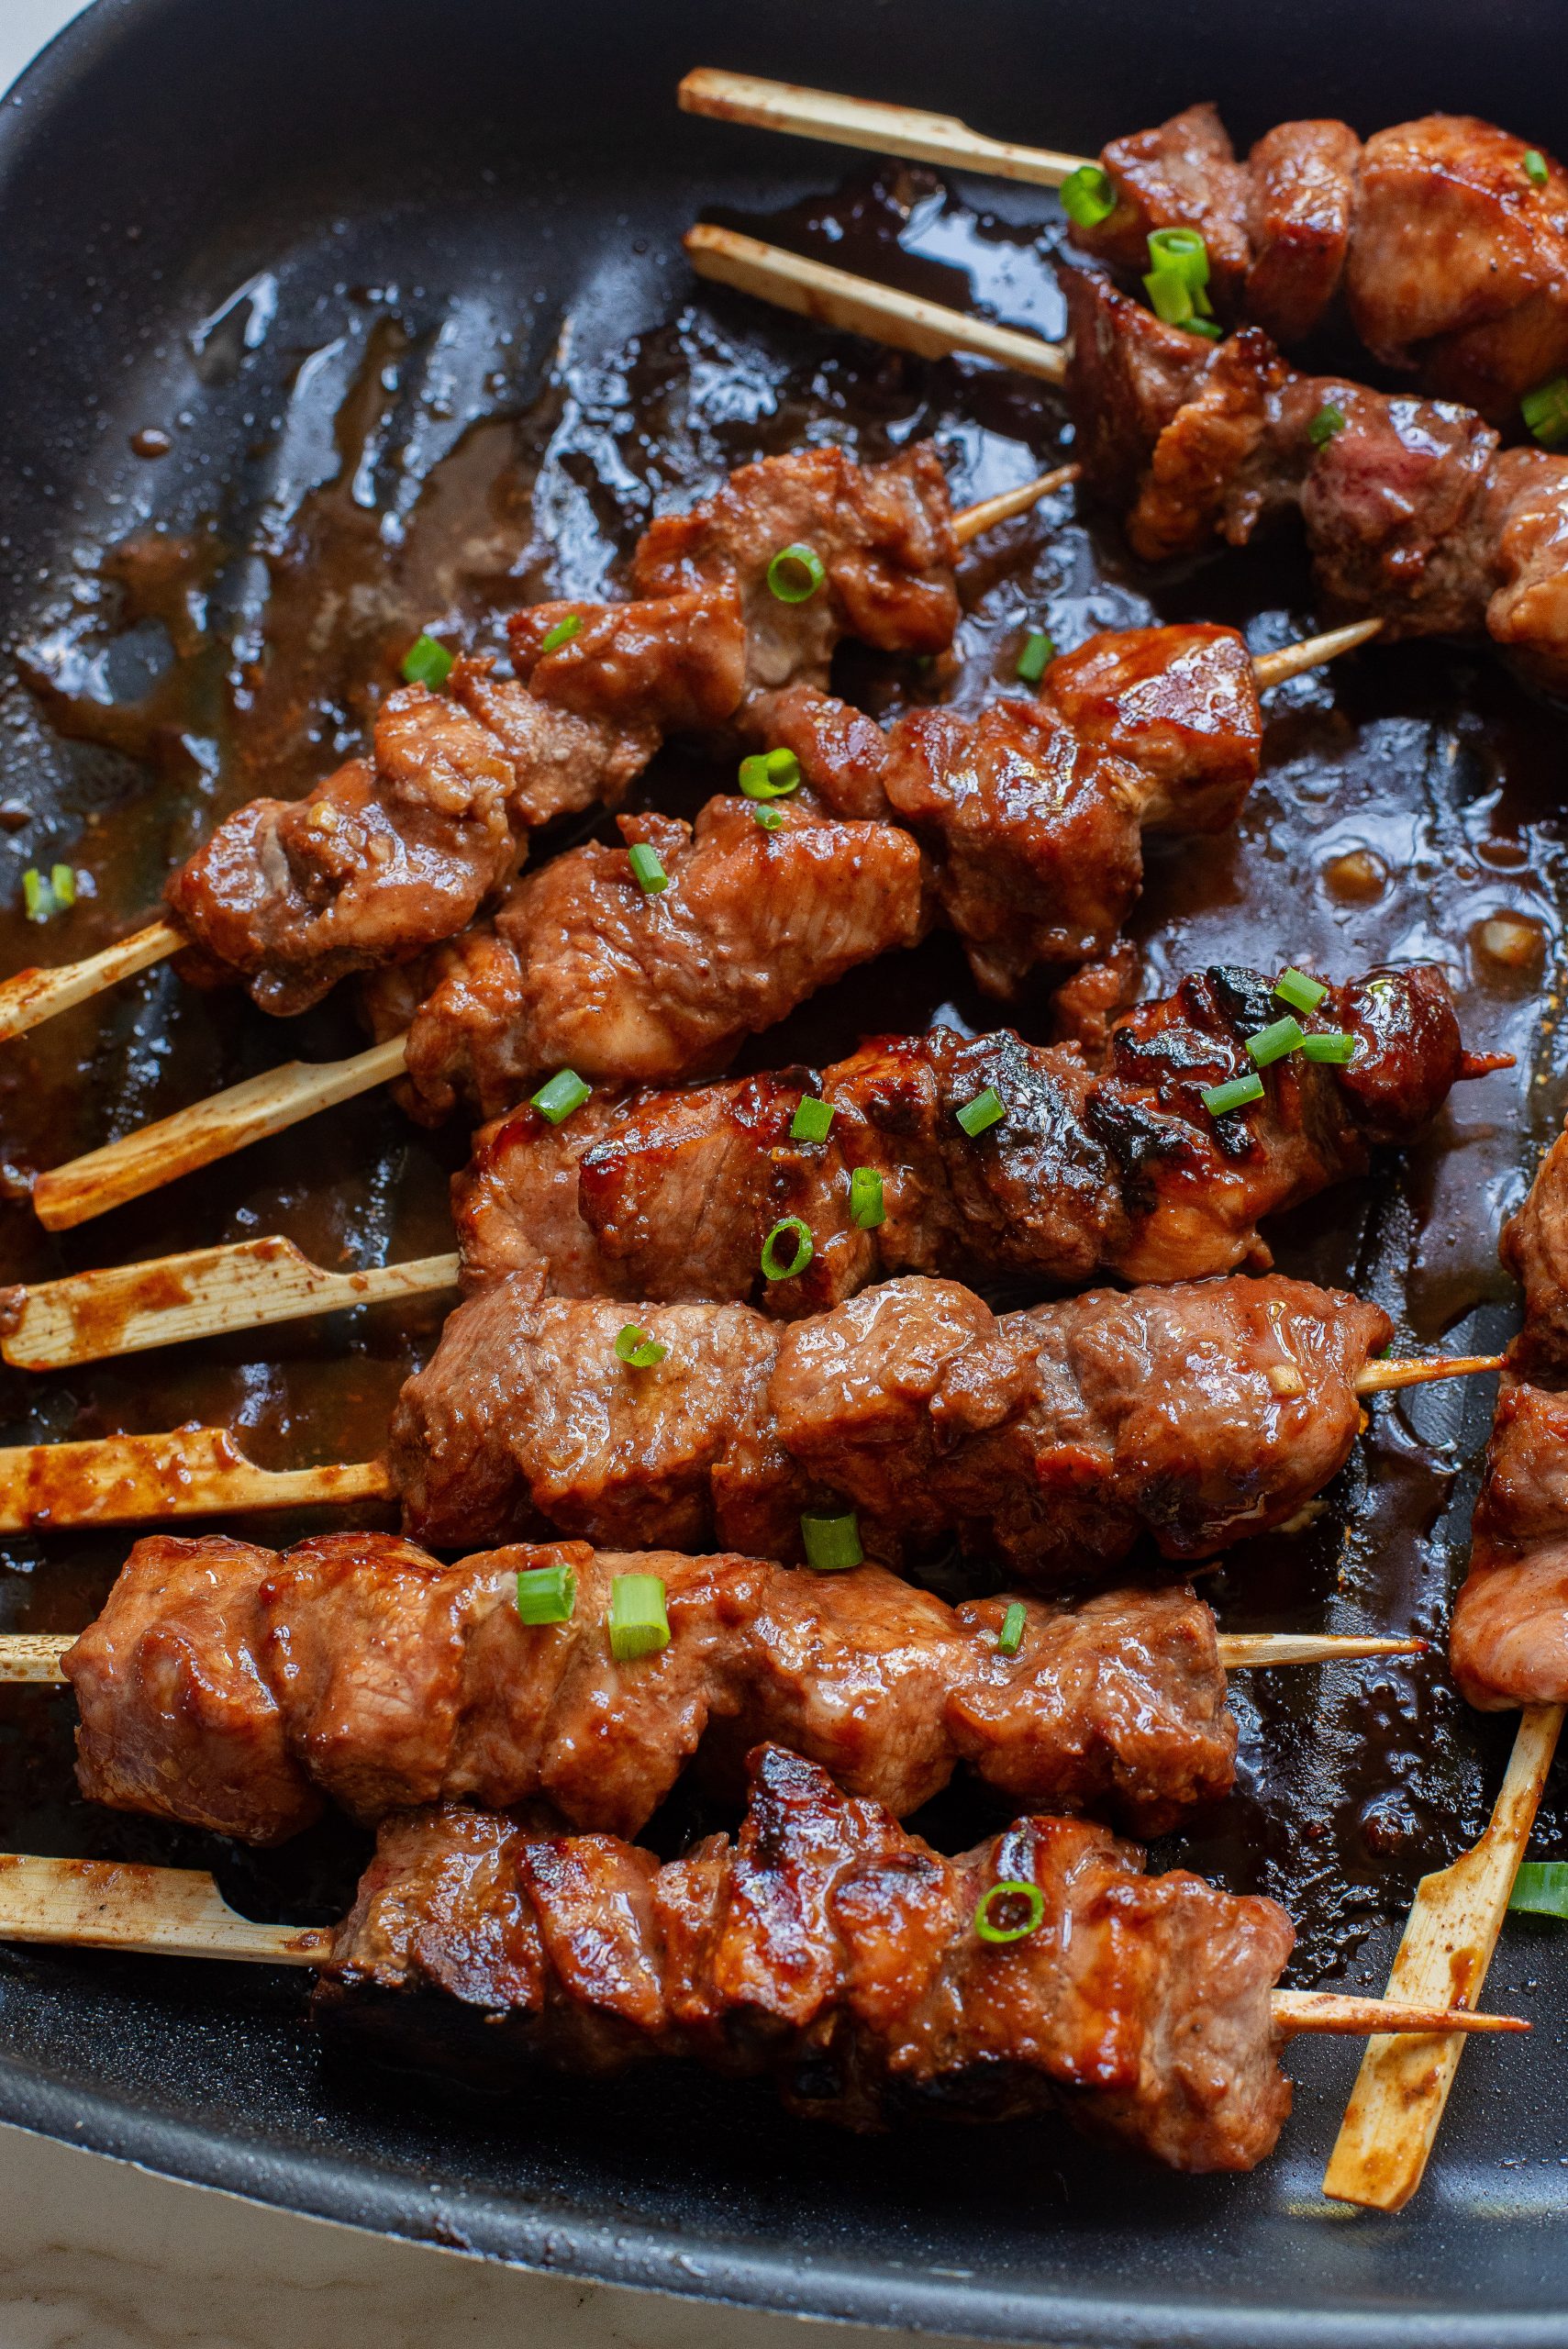 Hoisin Pork Tenderloin cut into strips and grilled in a grill pan on bamboo skewers - one of the recipes for this week's healthy weekly meal plan